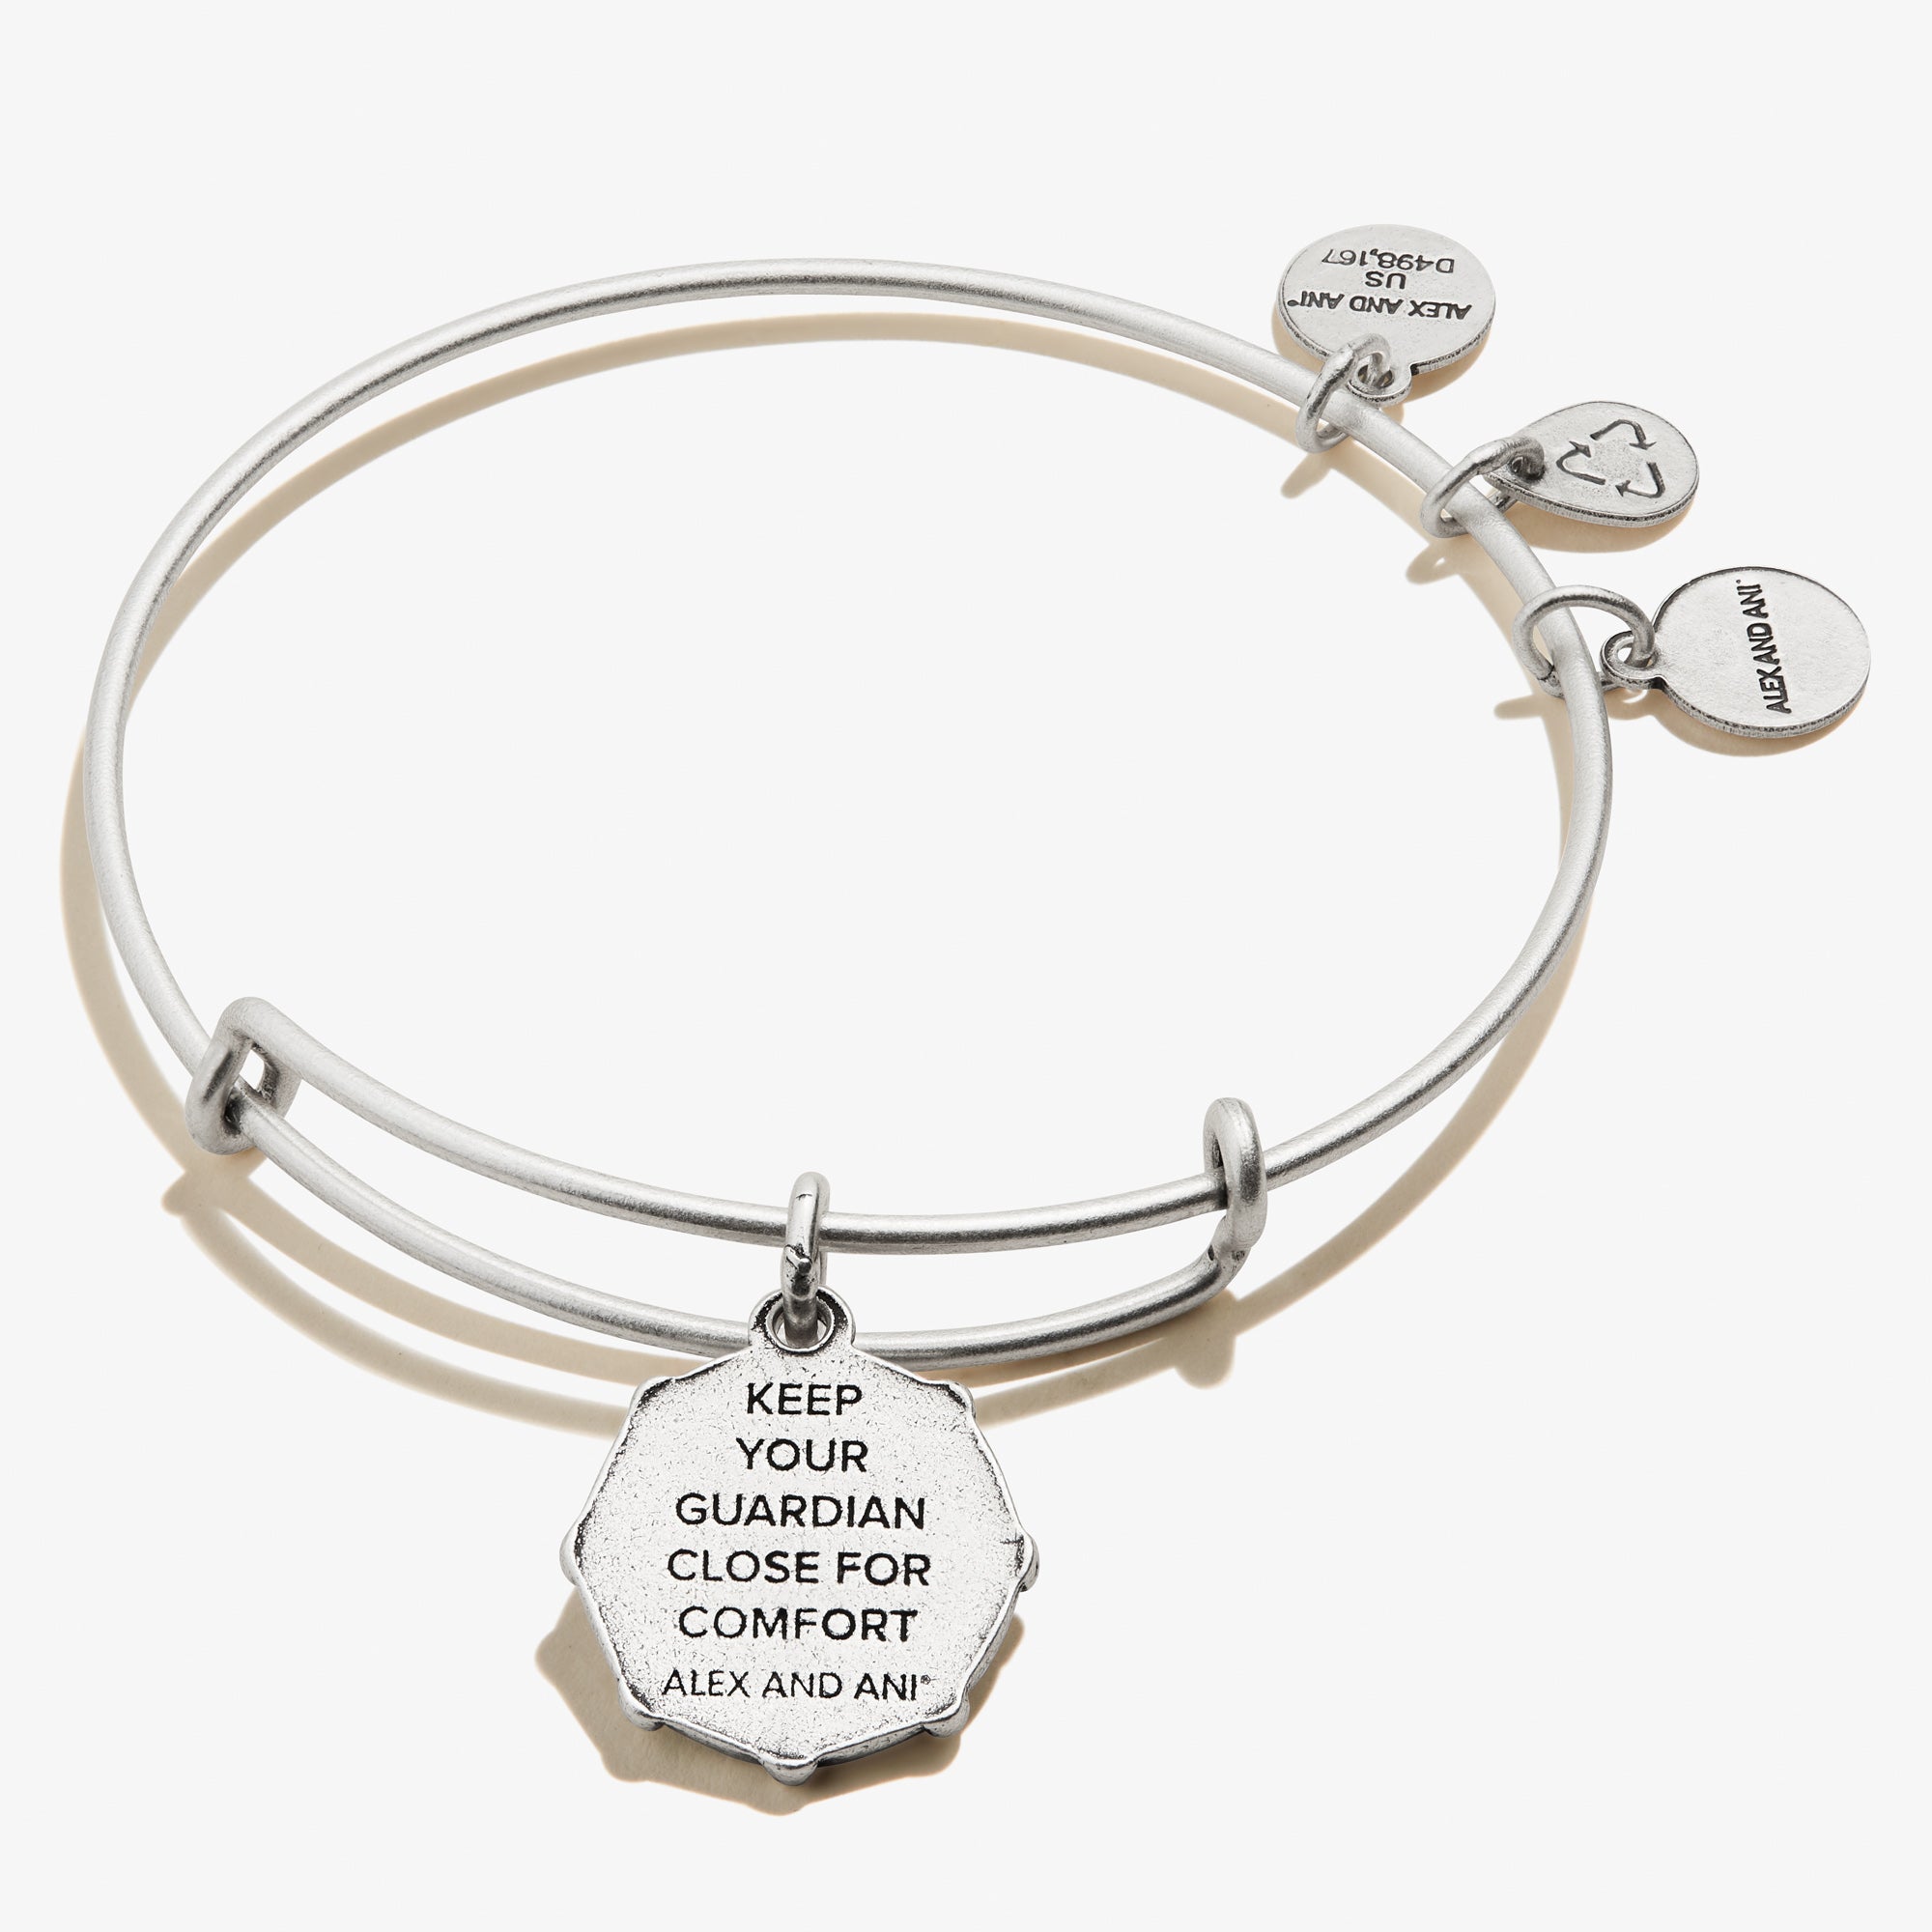 8 inch Round Double Loop Bangle Bracelet with a Guardian Angel charm. 